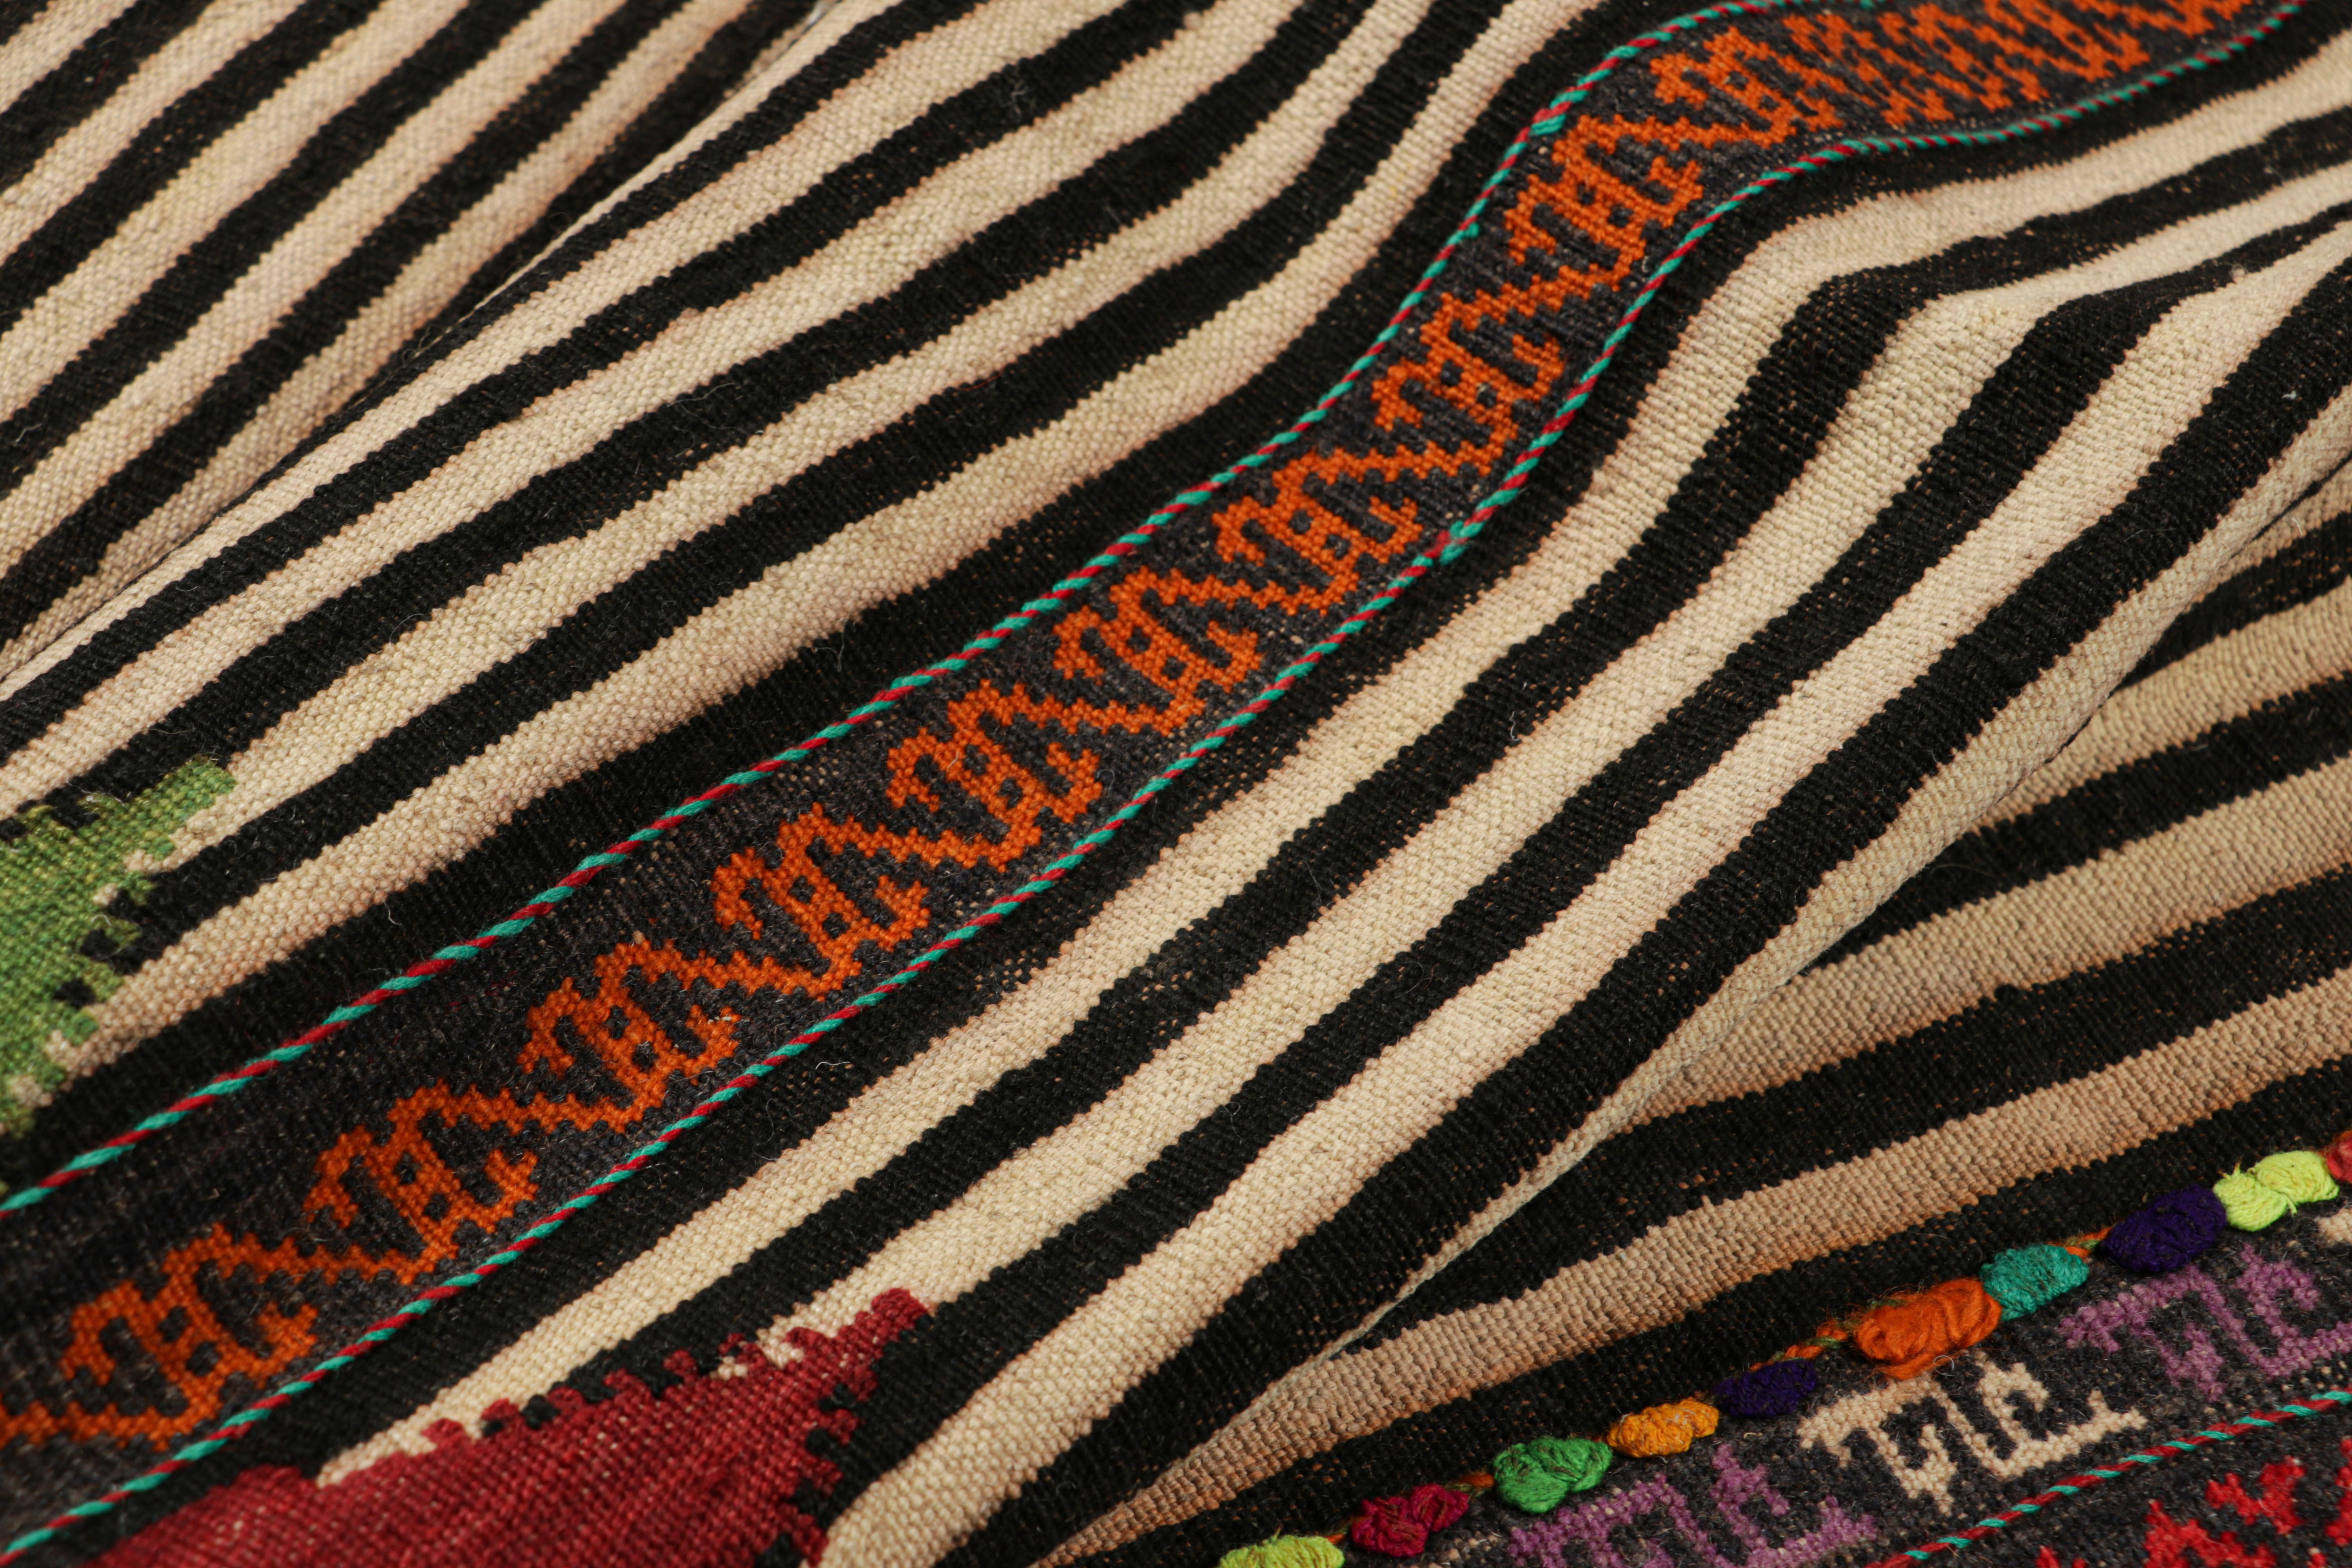 Hand-Woven Vintage Afghan Kilim with Polychromatic Geometric Stripes, from Rug & Kilim For Sale